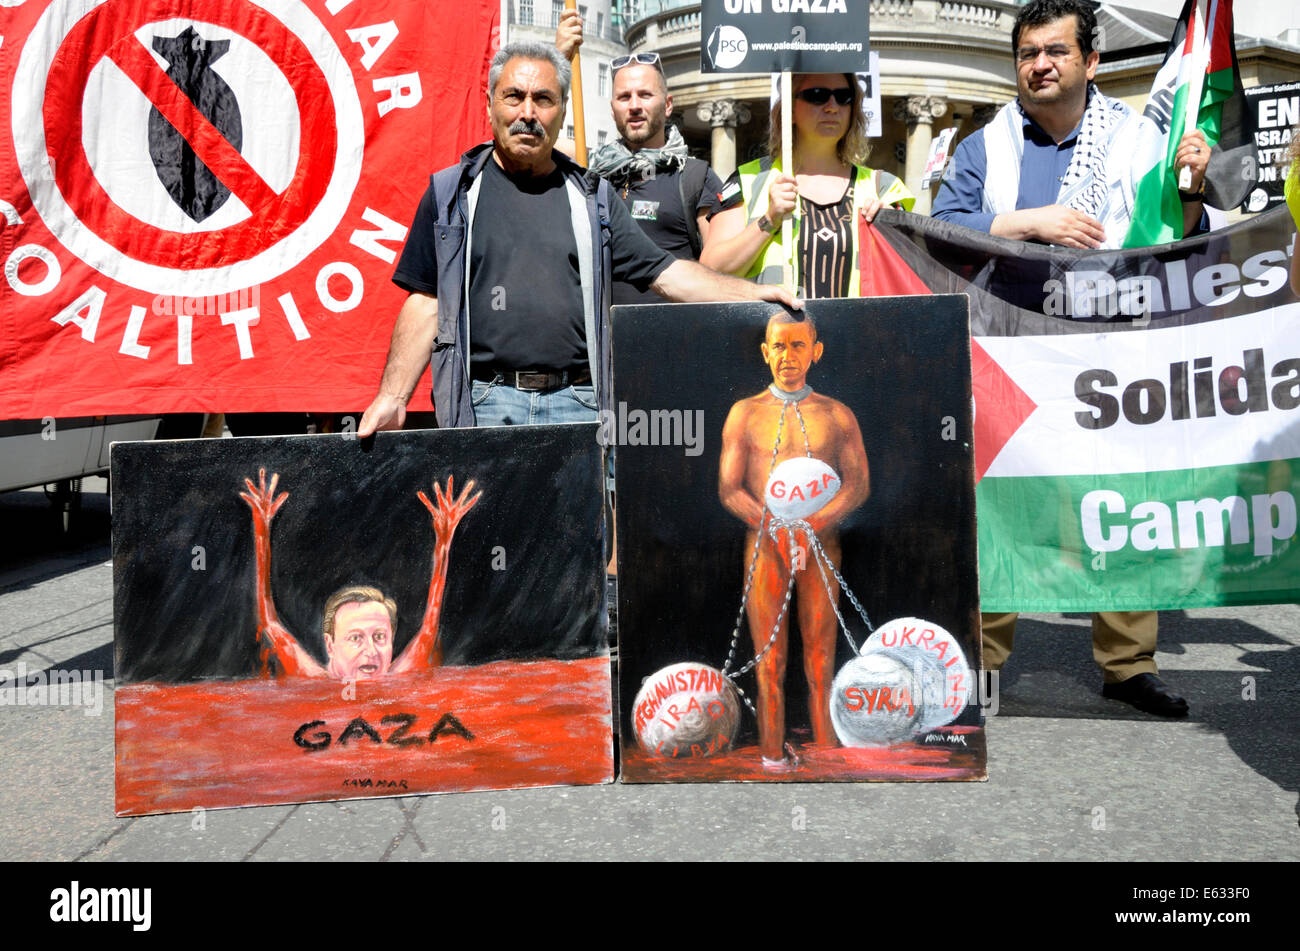 Kaya Mar - Turkish political cartoonist - with two of his satirical paintings at the March for Gaza, London, August 9th 2014 Stock Photo